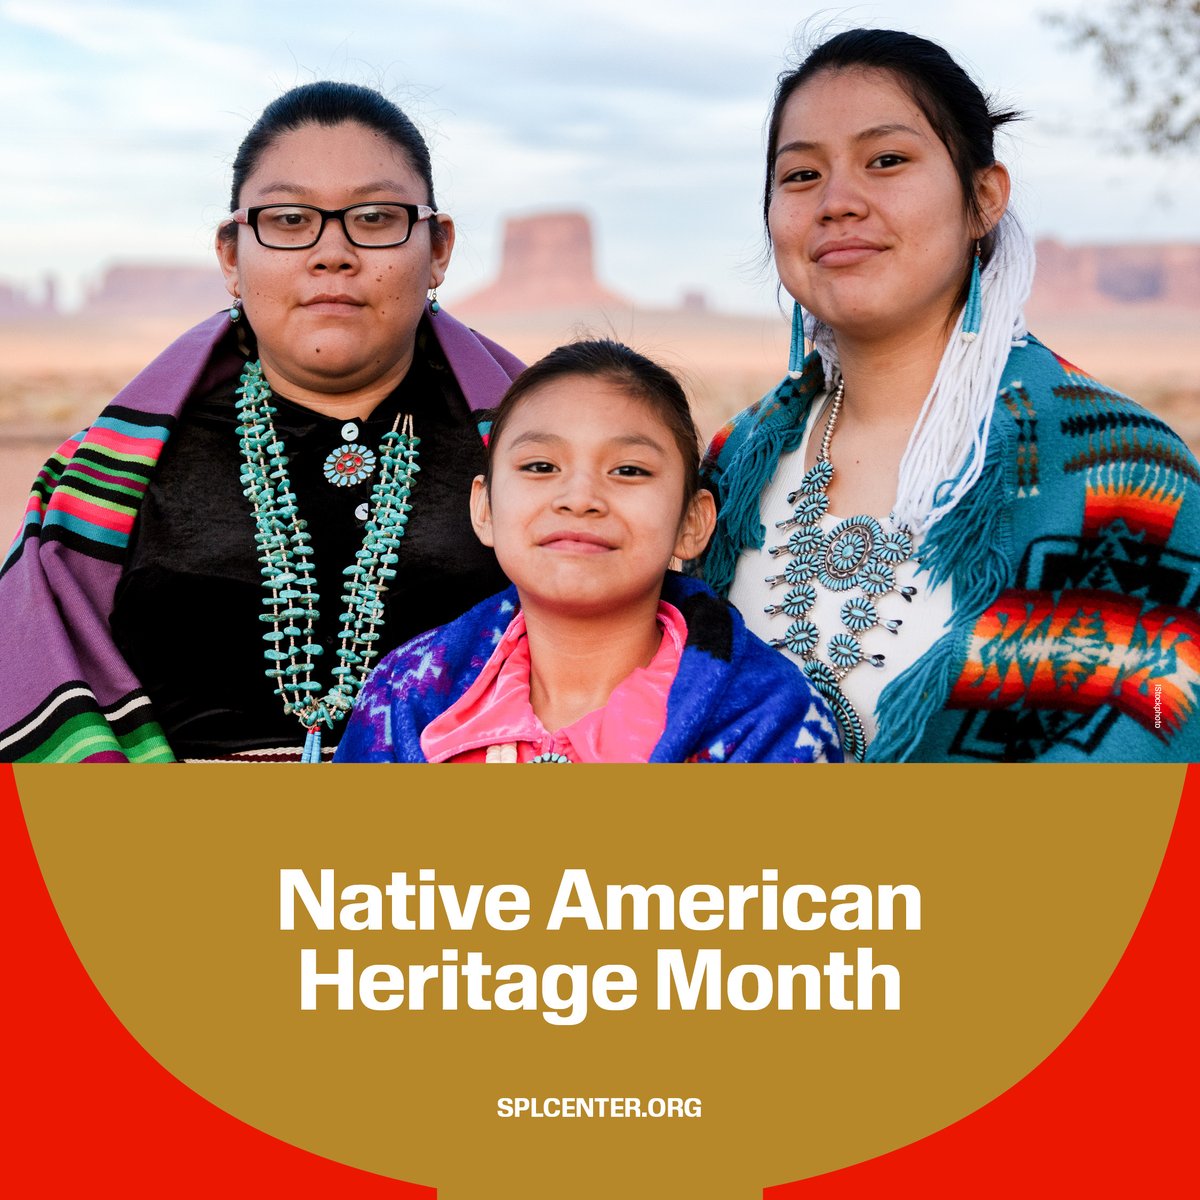 #NativeAmericanHeritageMonth is an opportunity to learn and celebrate the traditions, culture and history of Indigenous people. We uplift and celebrate the remarkable diversity of Indigenous communities and take this time to #TeachTruth about their histories and contributions.